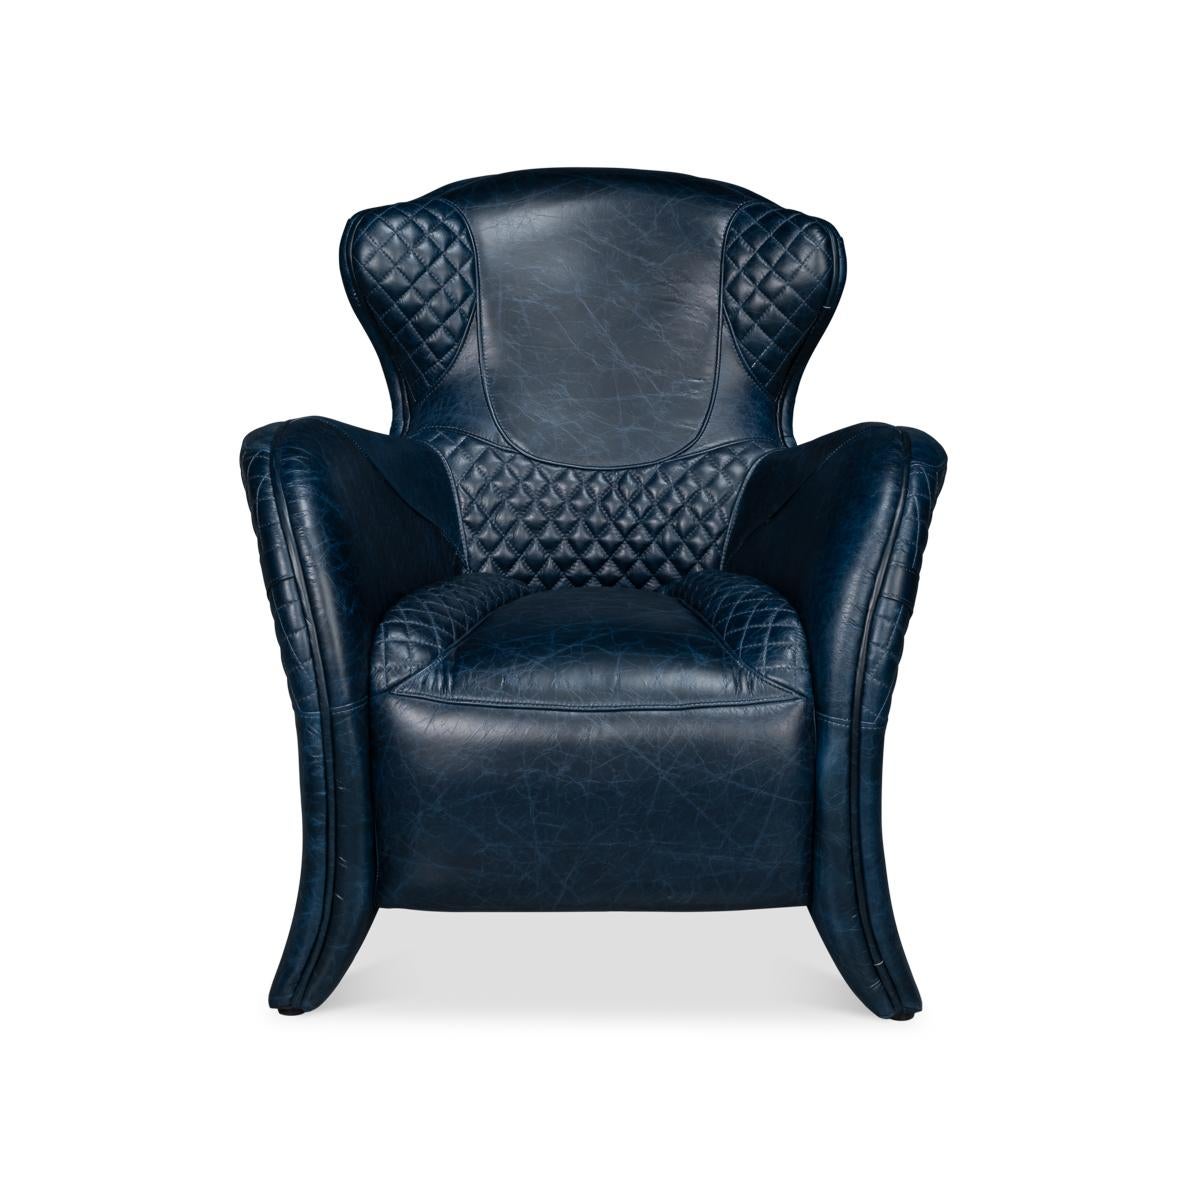 With top grain Chateau Blue leather, with a sloping rear and curved arms, with a partially quilted seat and backrest, with decorative buckles.
Dimensions: 31